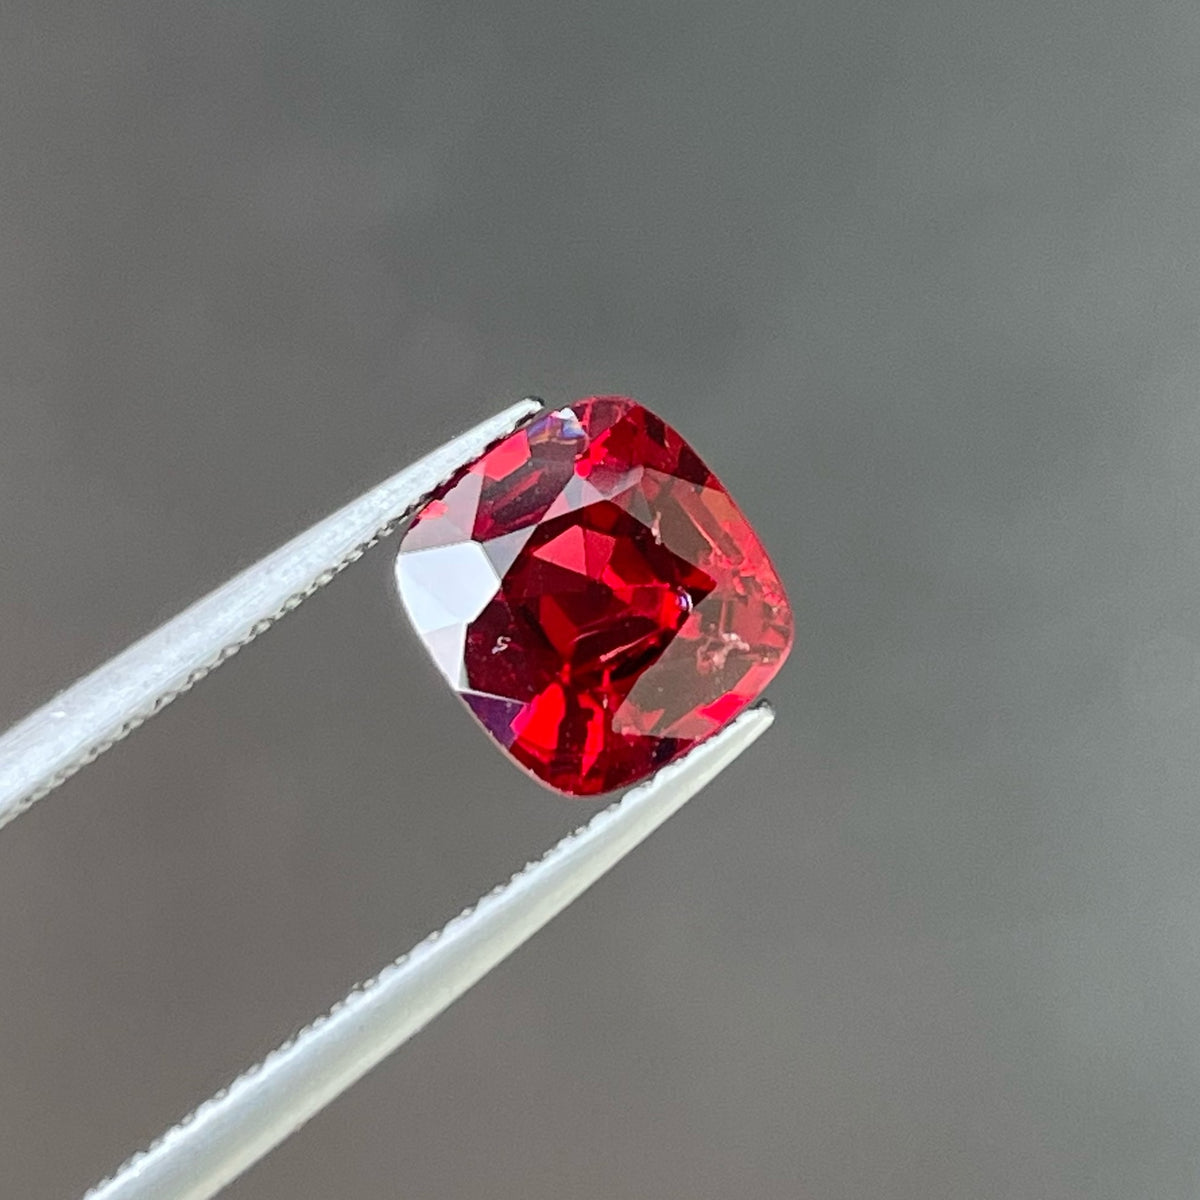 Exceptional Bright Red Loose Spinel